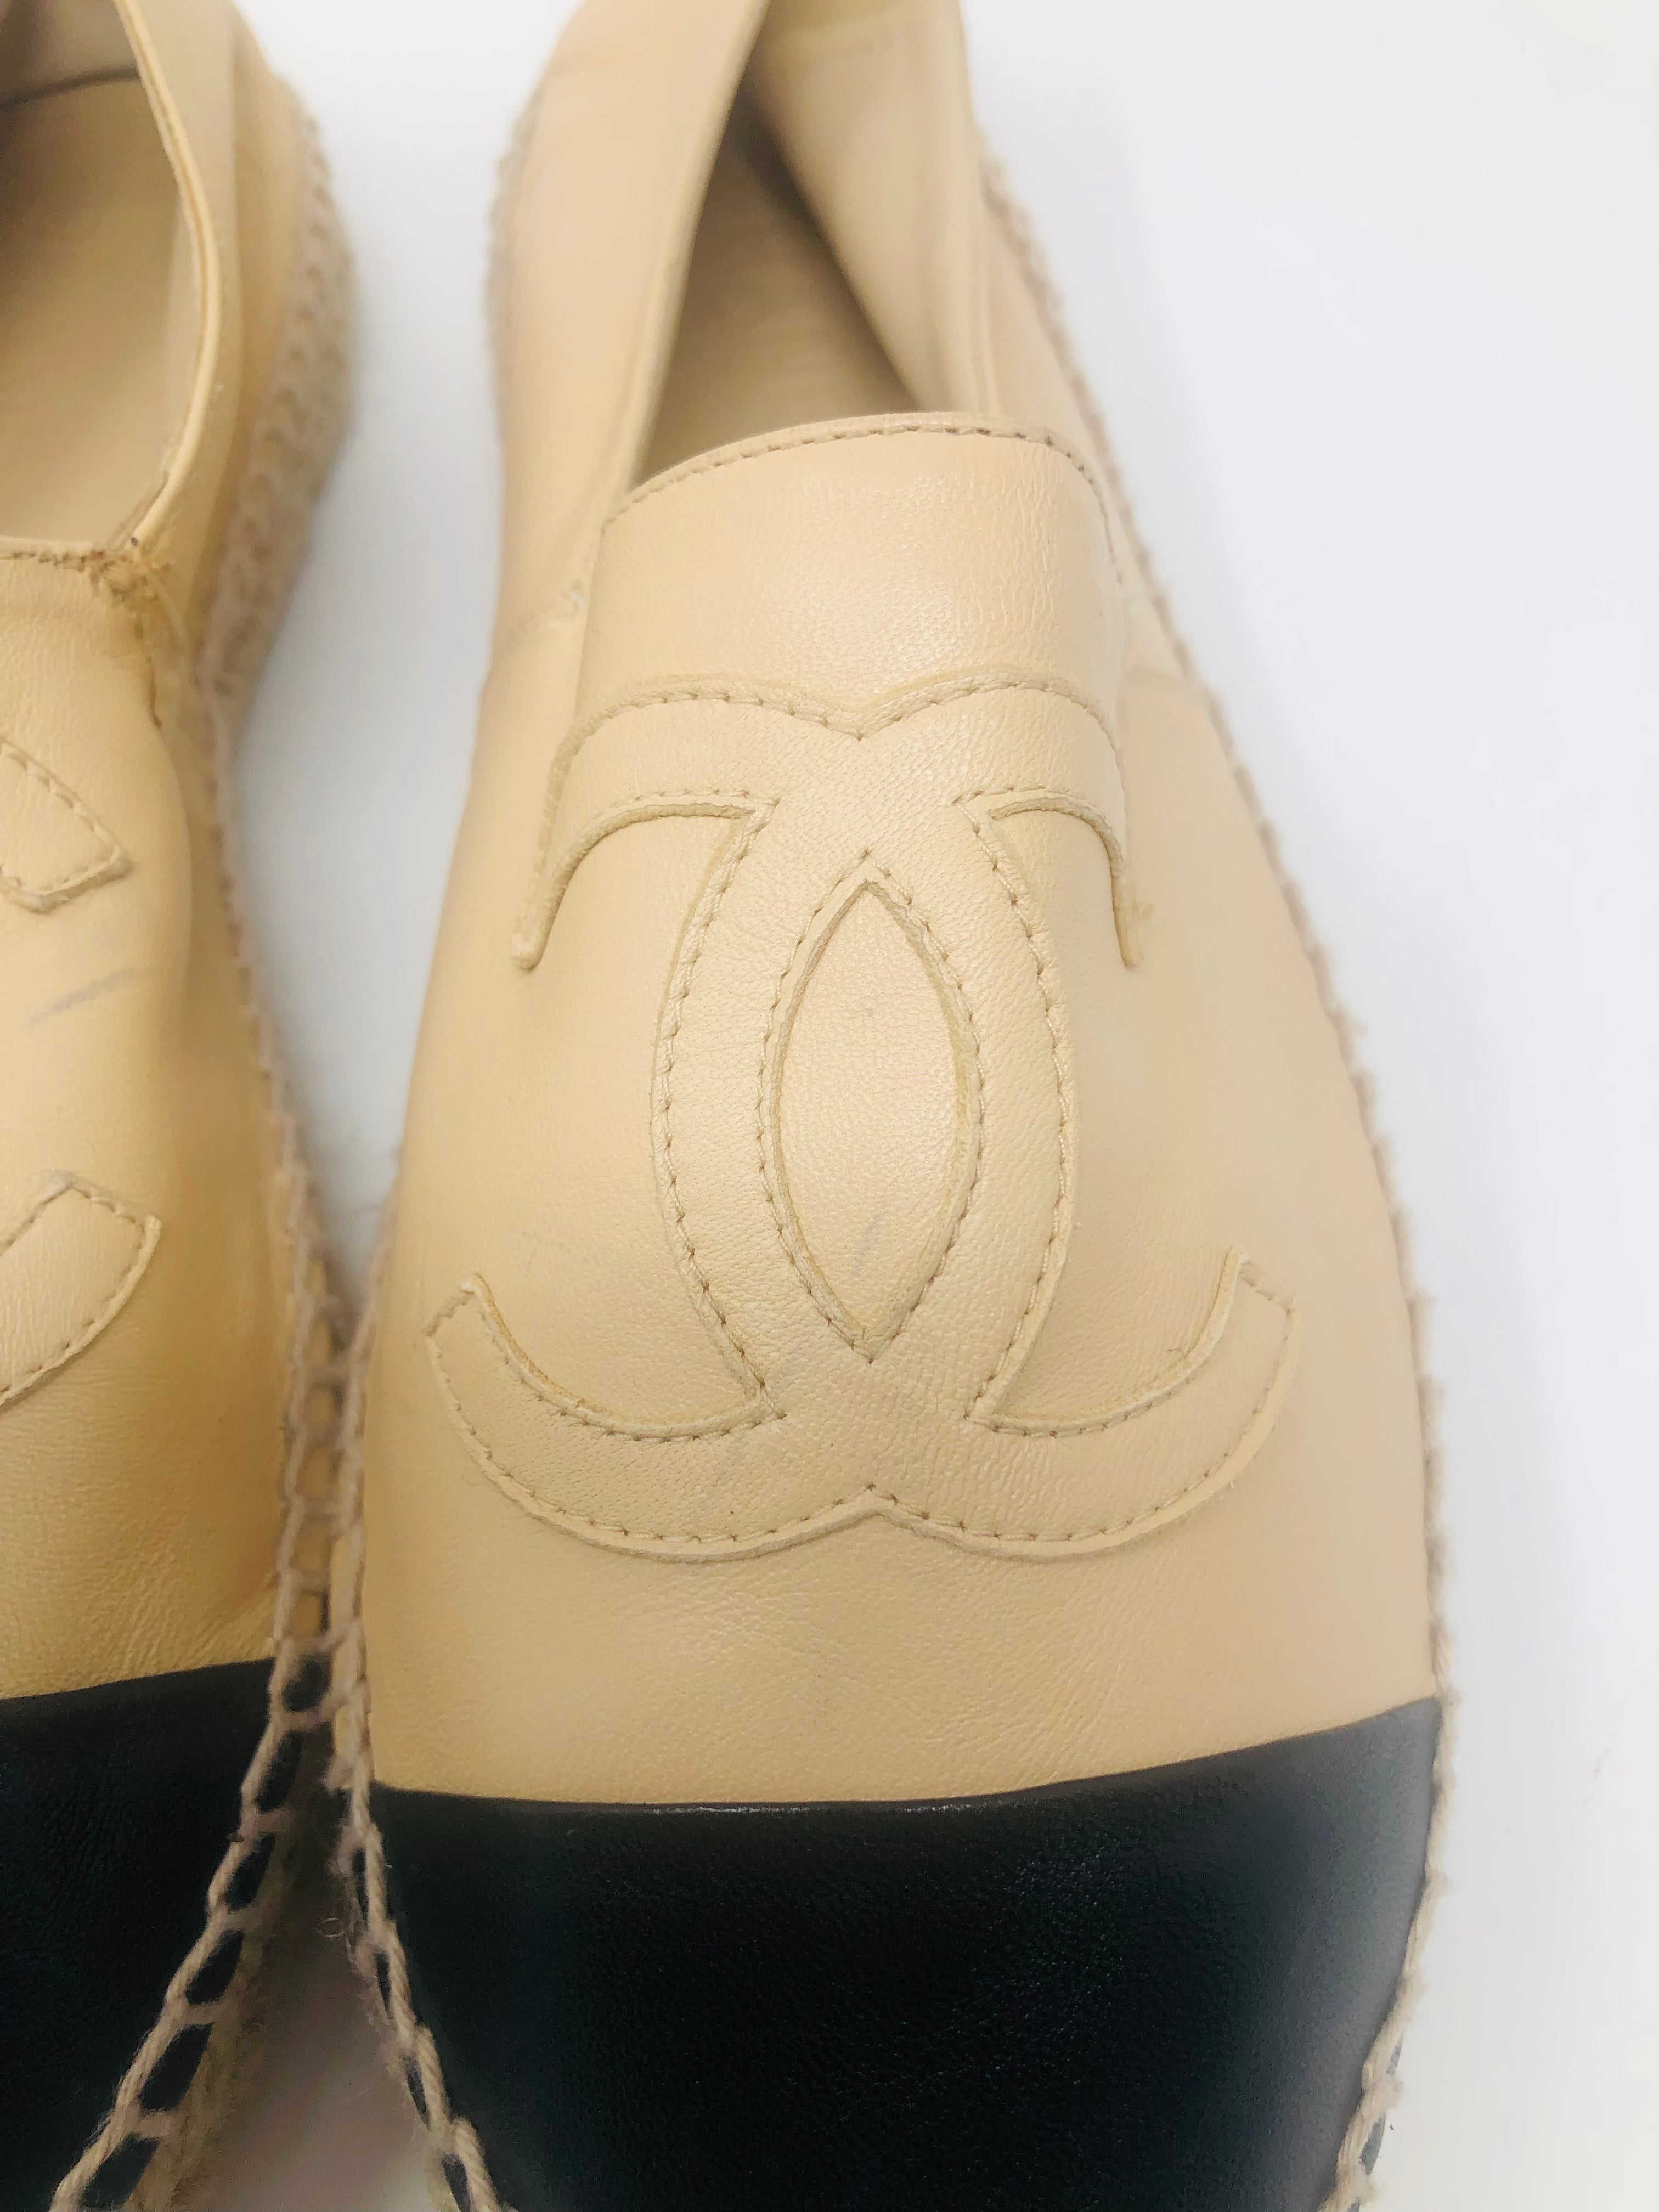 Chanel Lambskin Black and Tan Leather Espadrilles